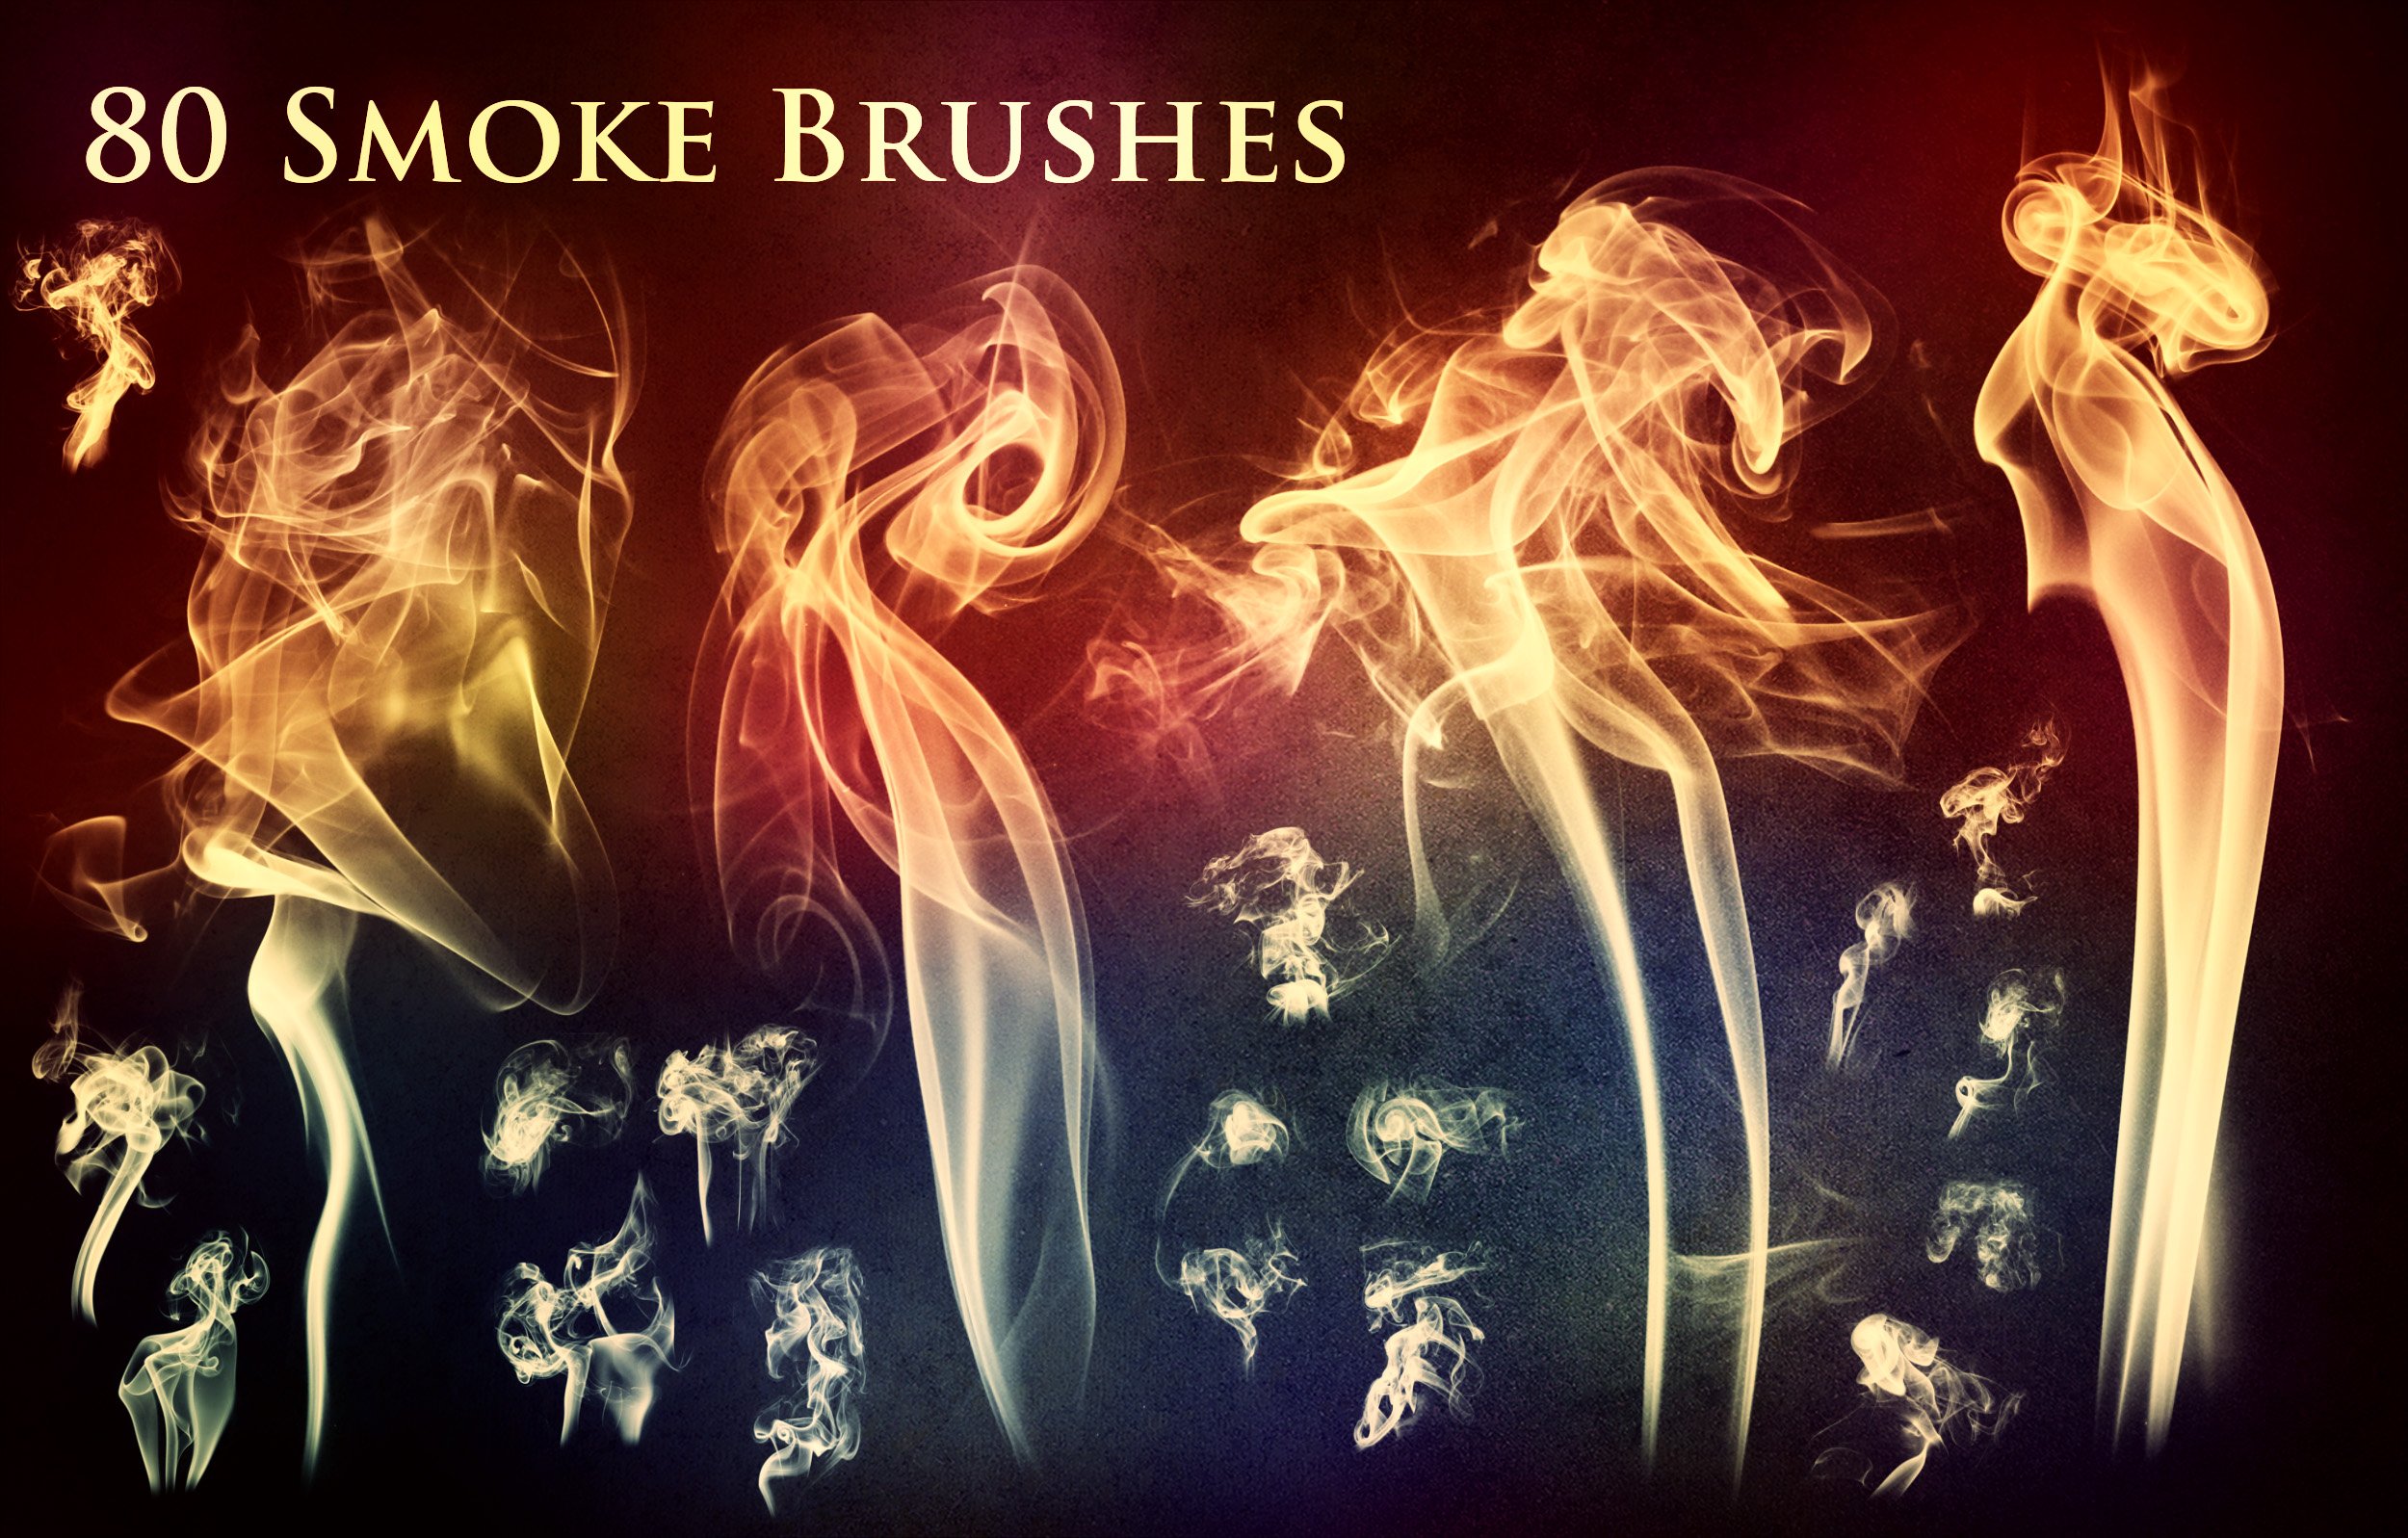 1500+ Brushes Megapackpreview image.